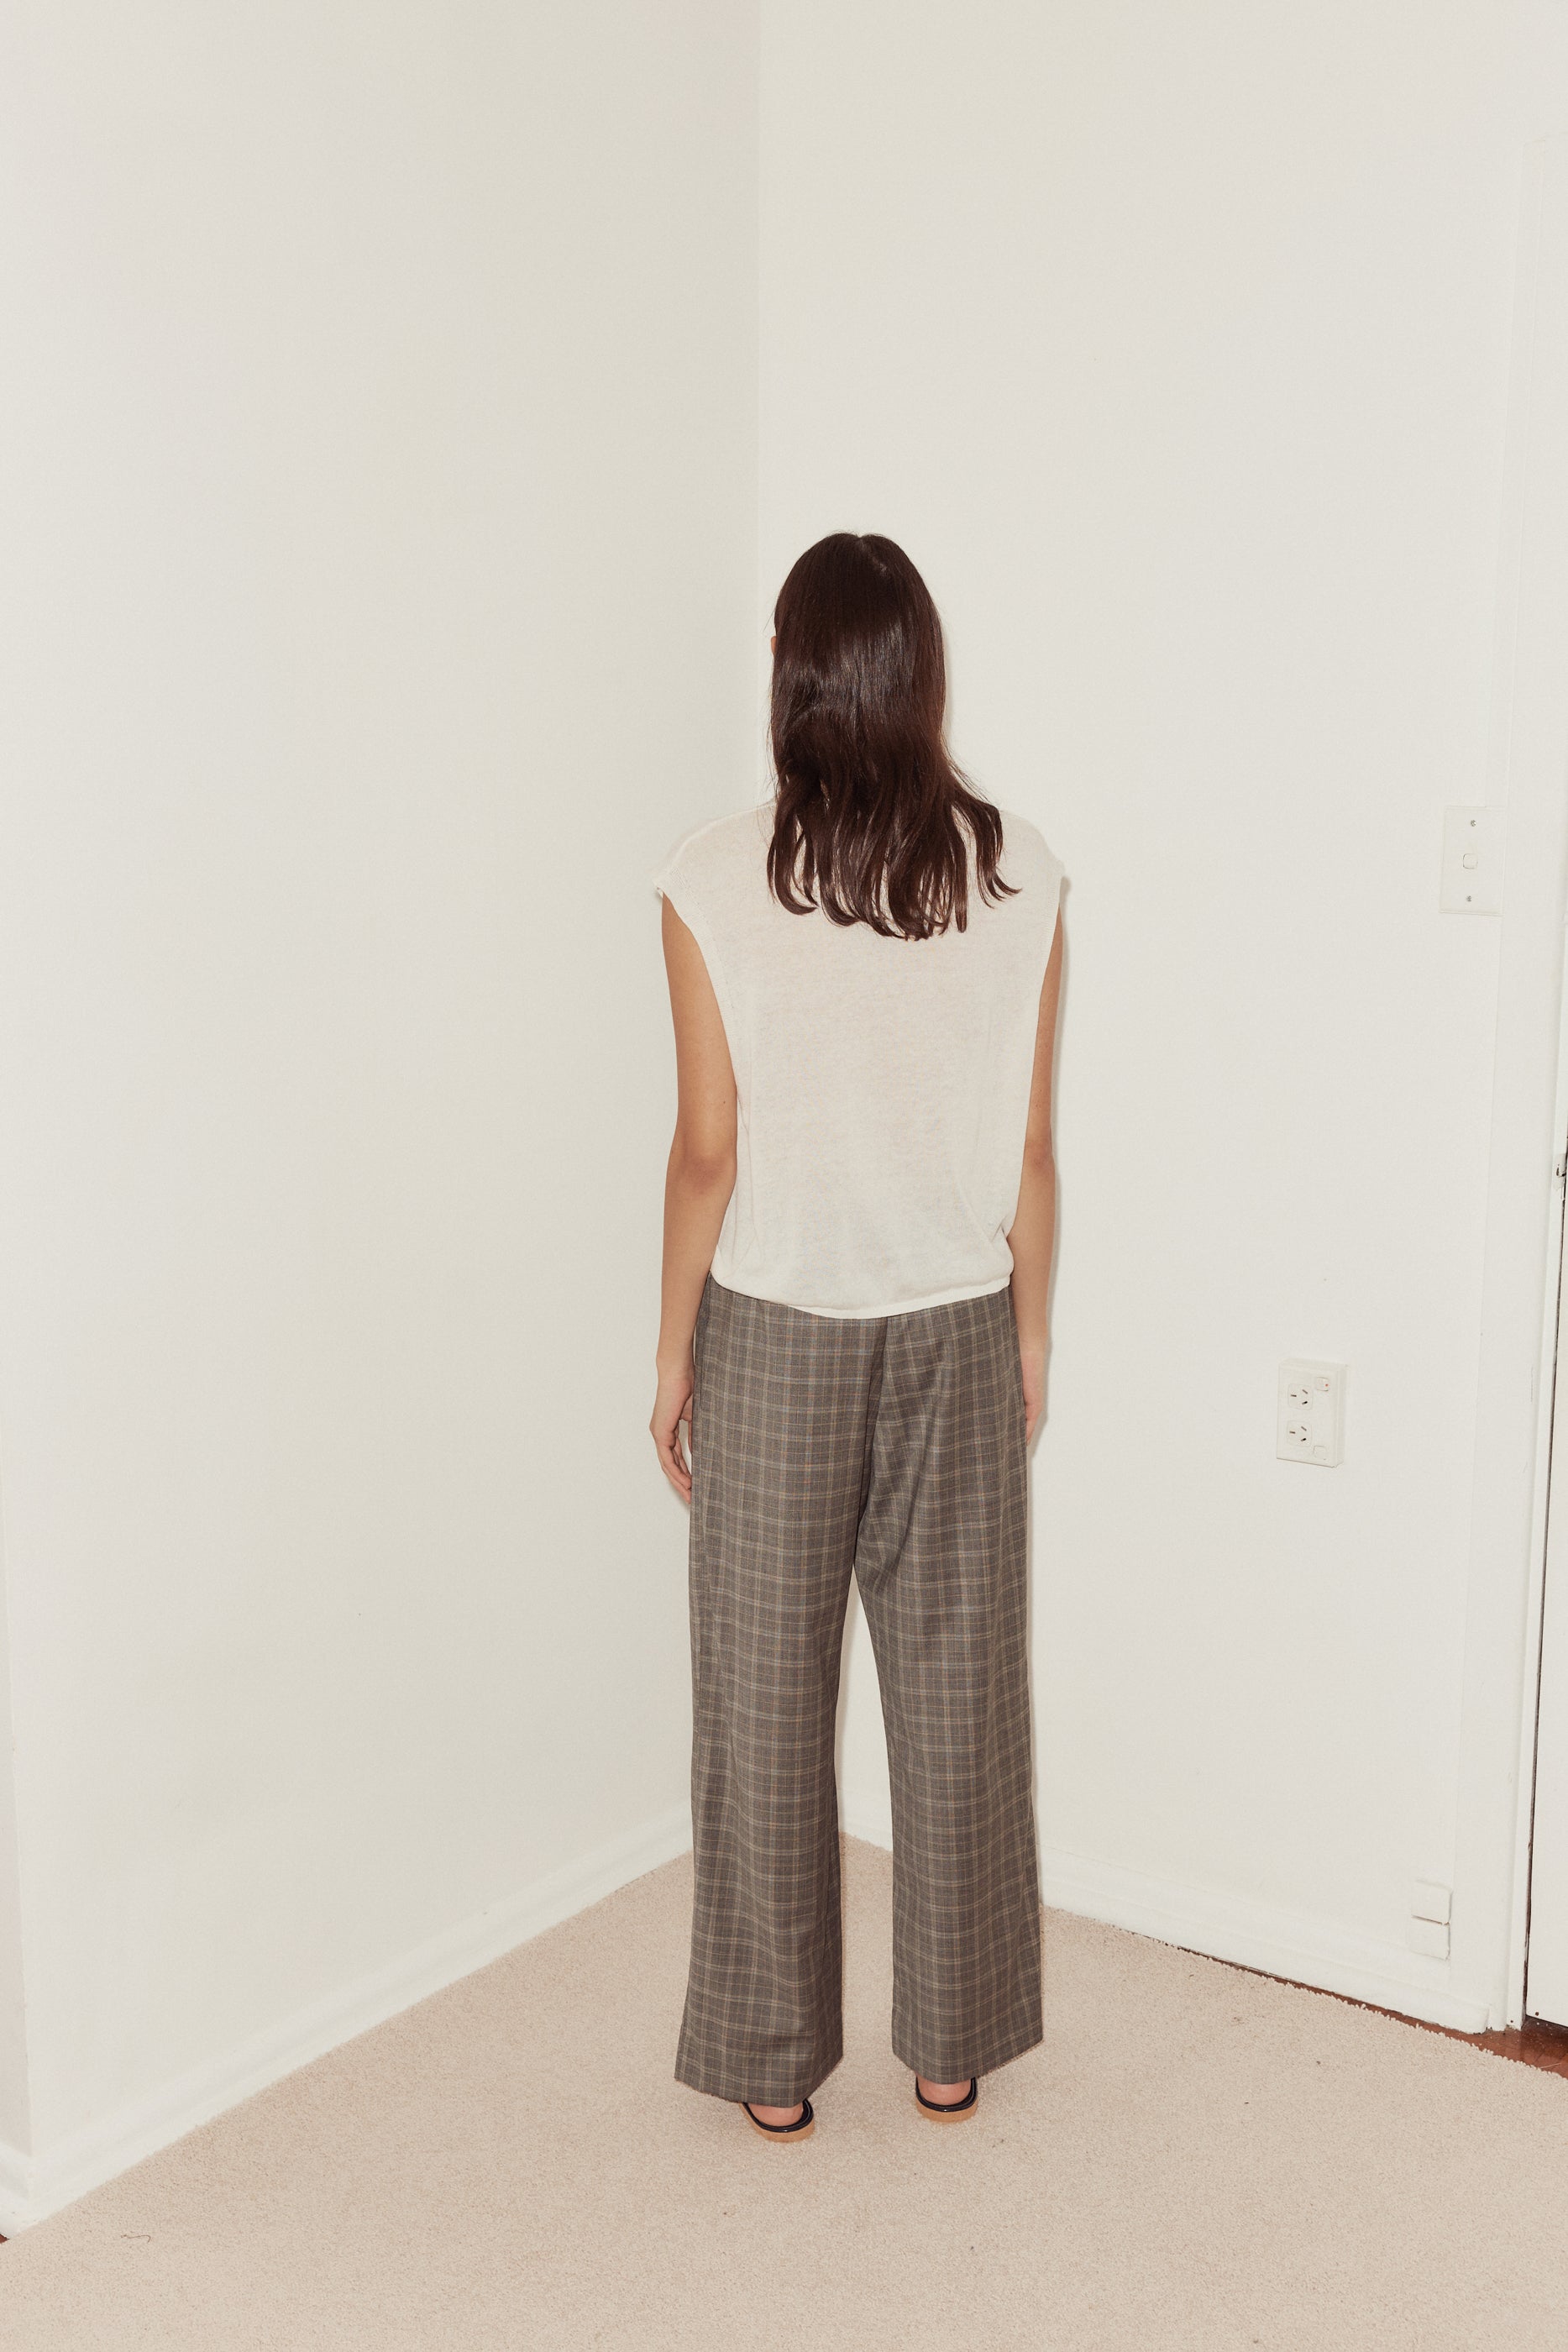 Female model wearing Tailored Pants - Everyday Check by Deiji Studios against plain background